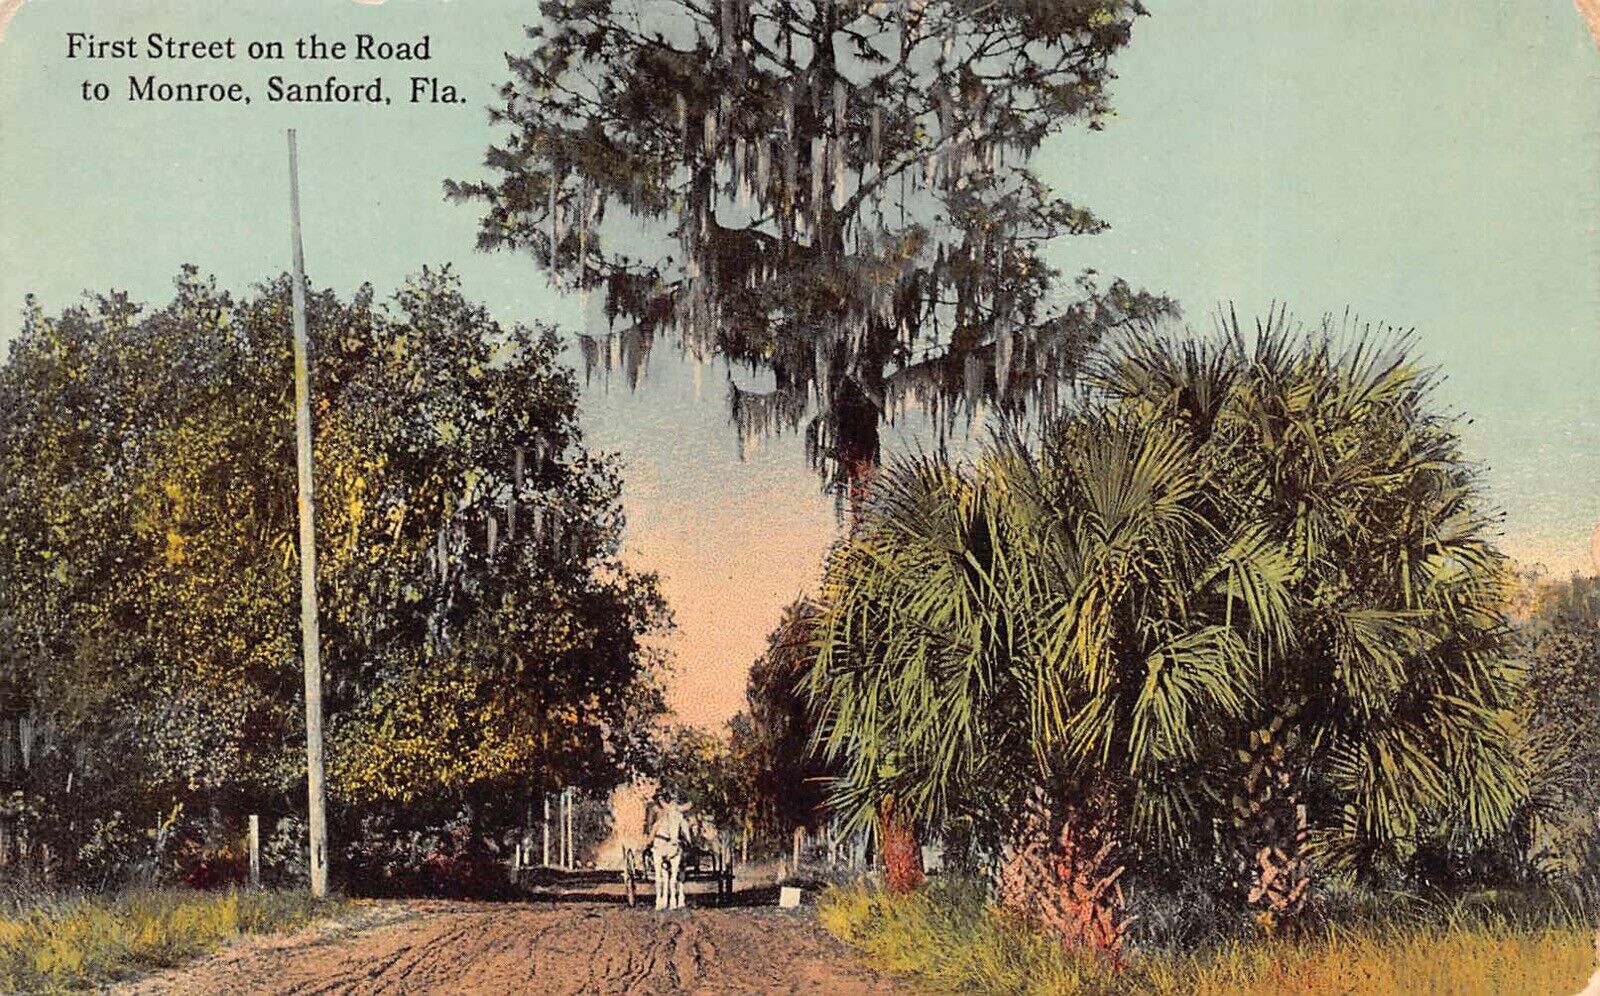 FL - 1913 First Street on Road to Monroe at Sanford, FLA - Seminole County